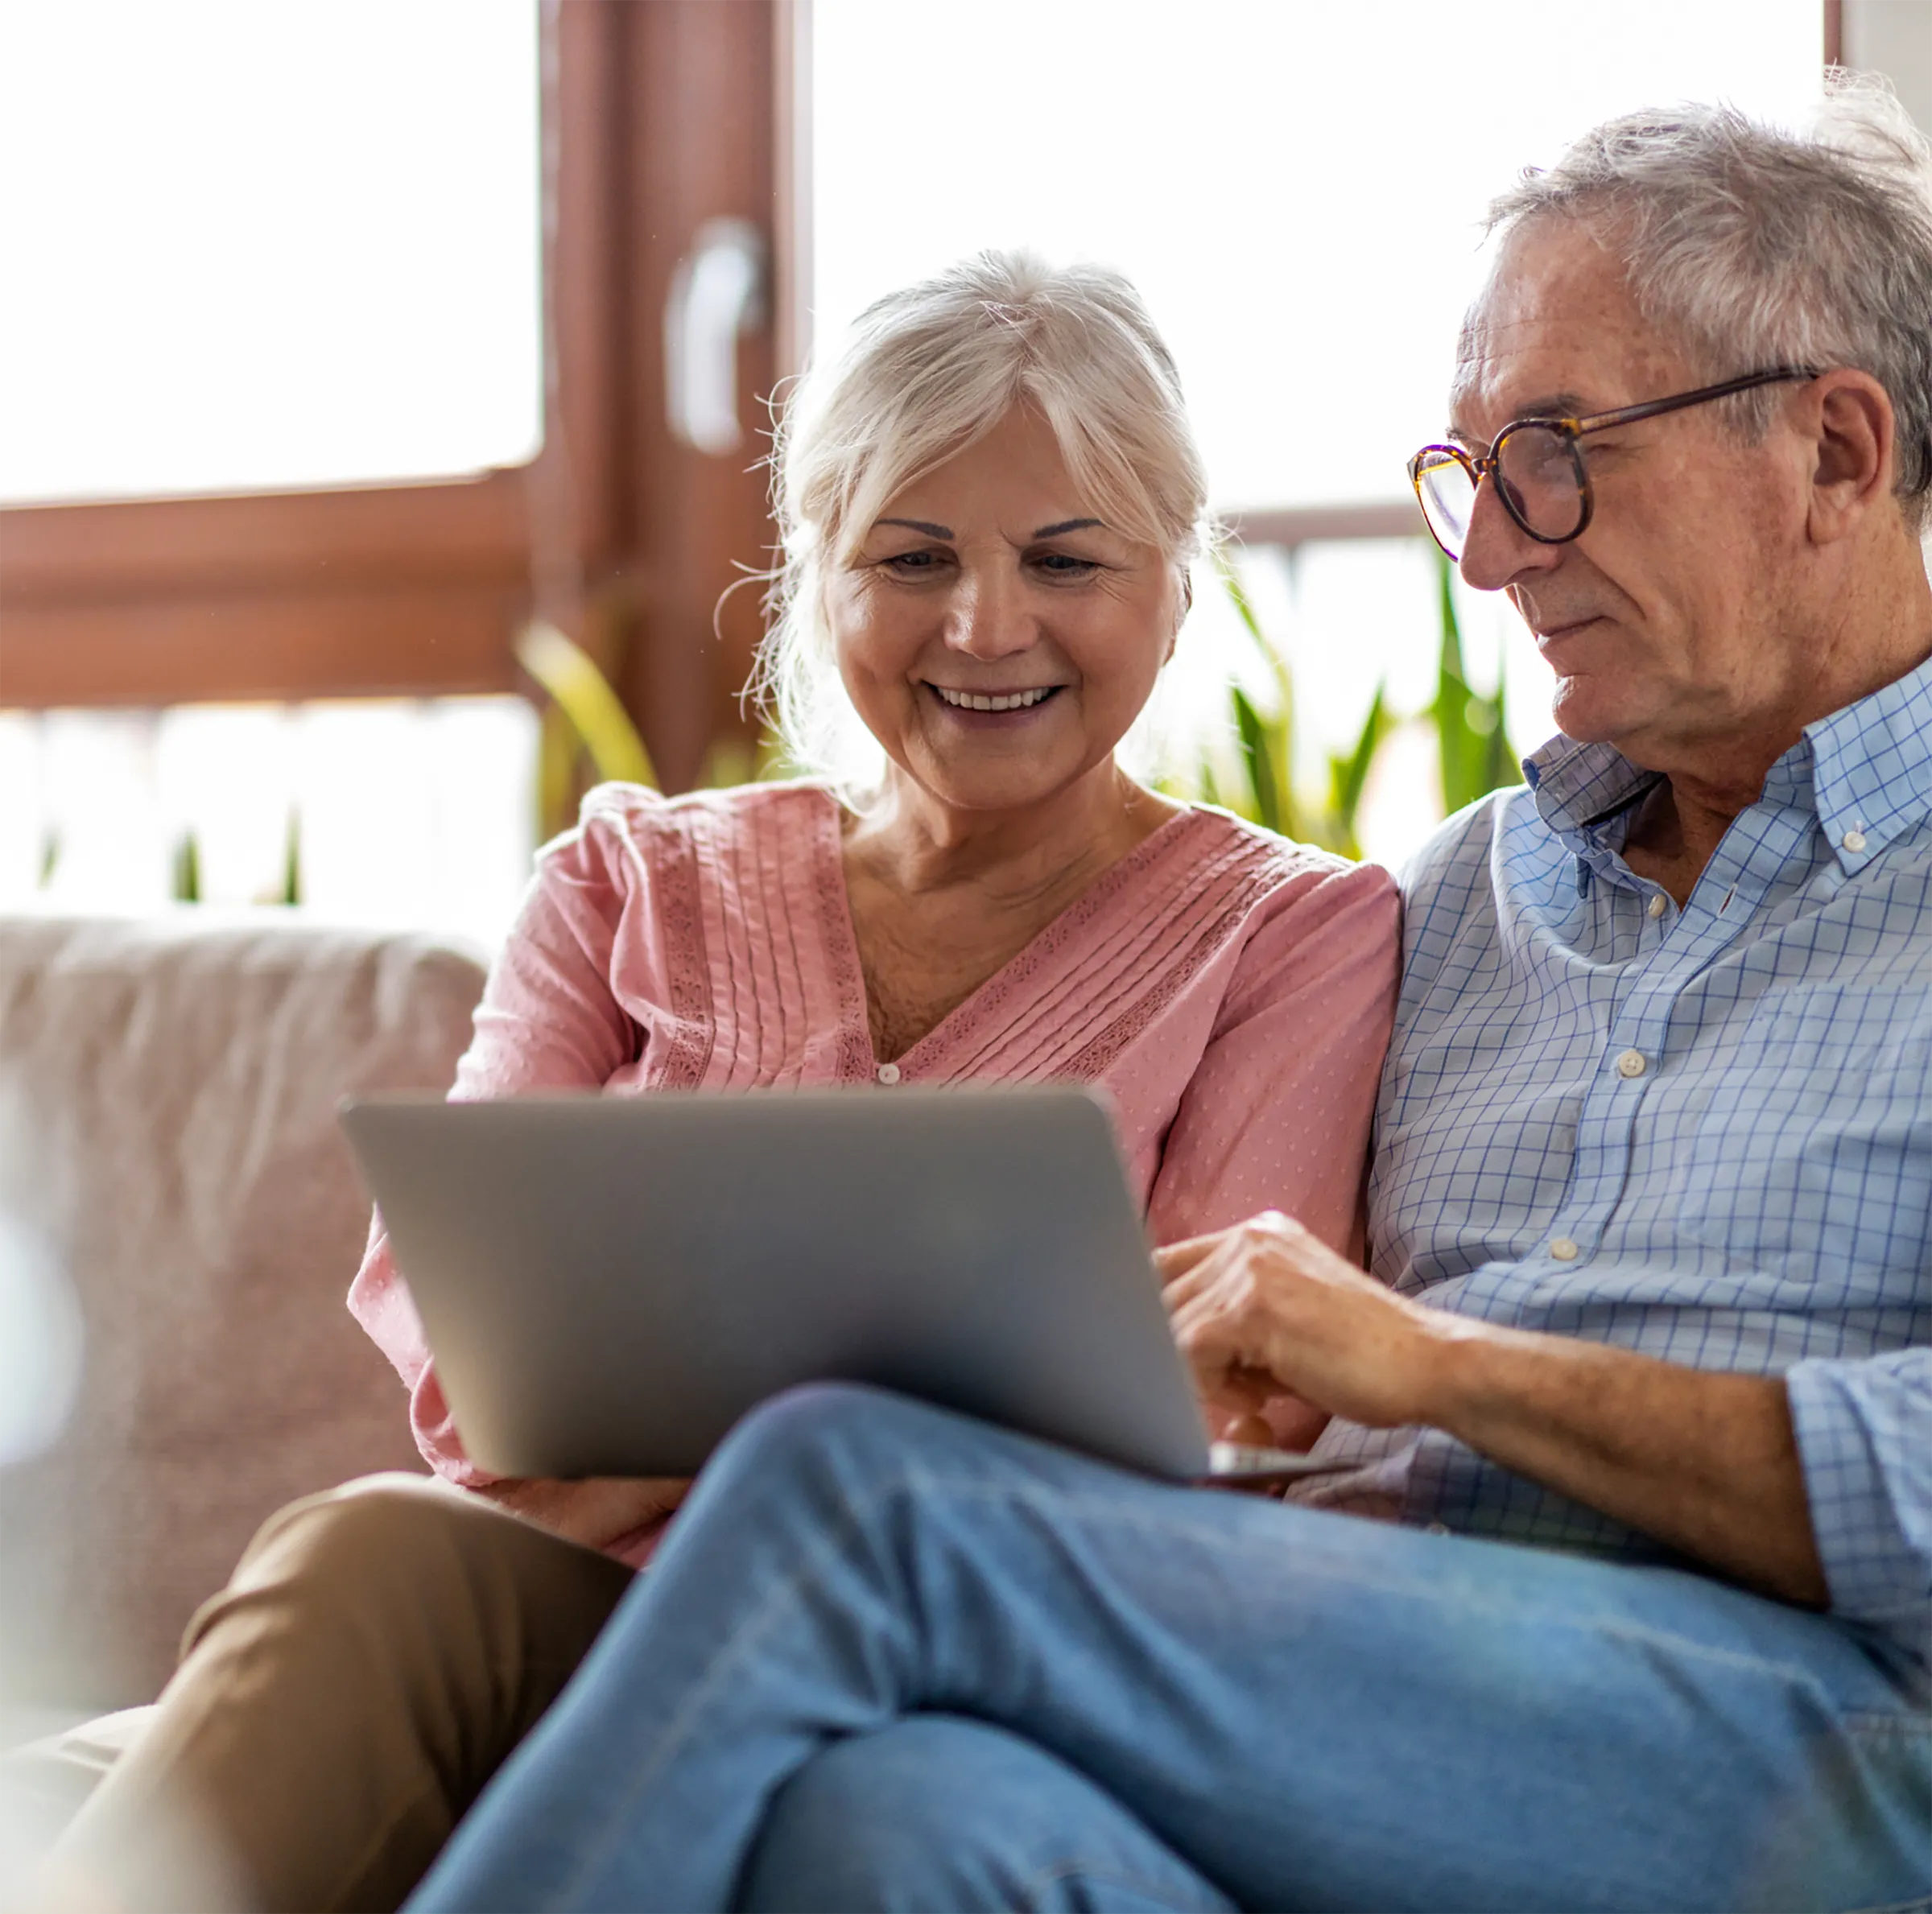 An old couple sitting together on a couch looking at a laptop